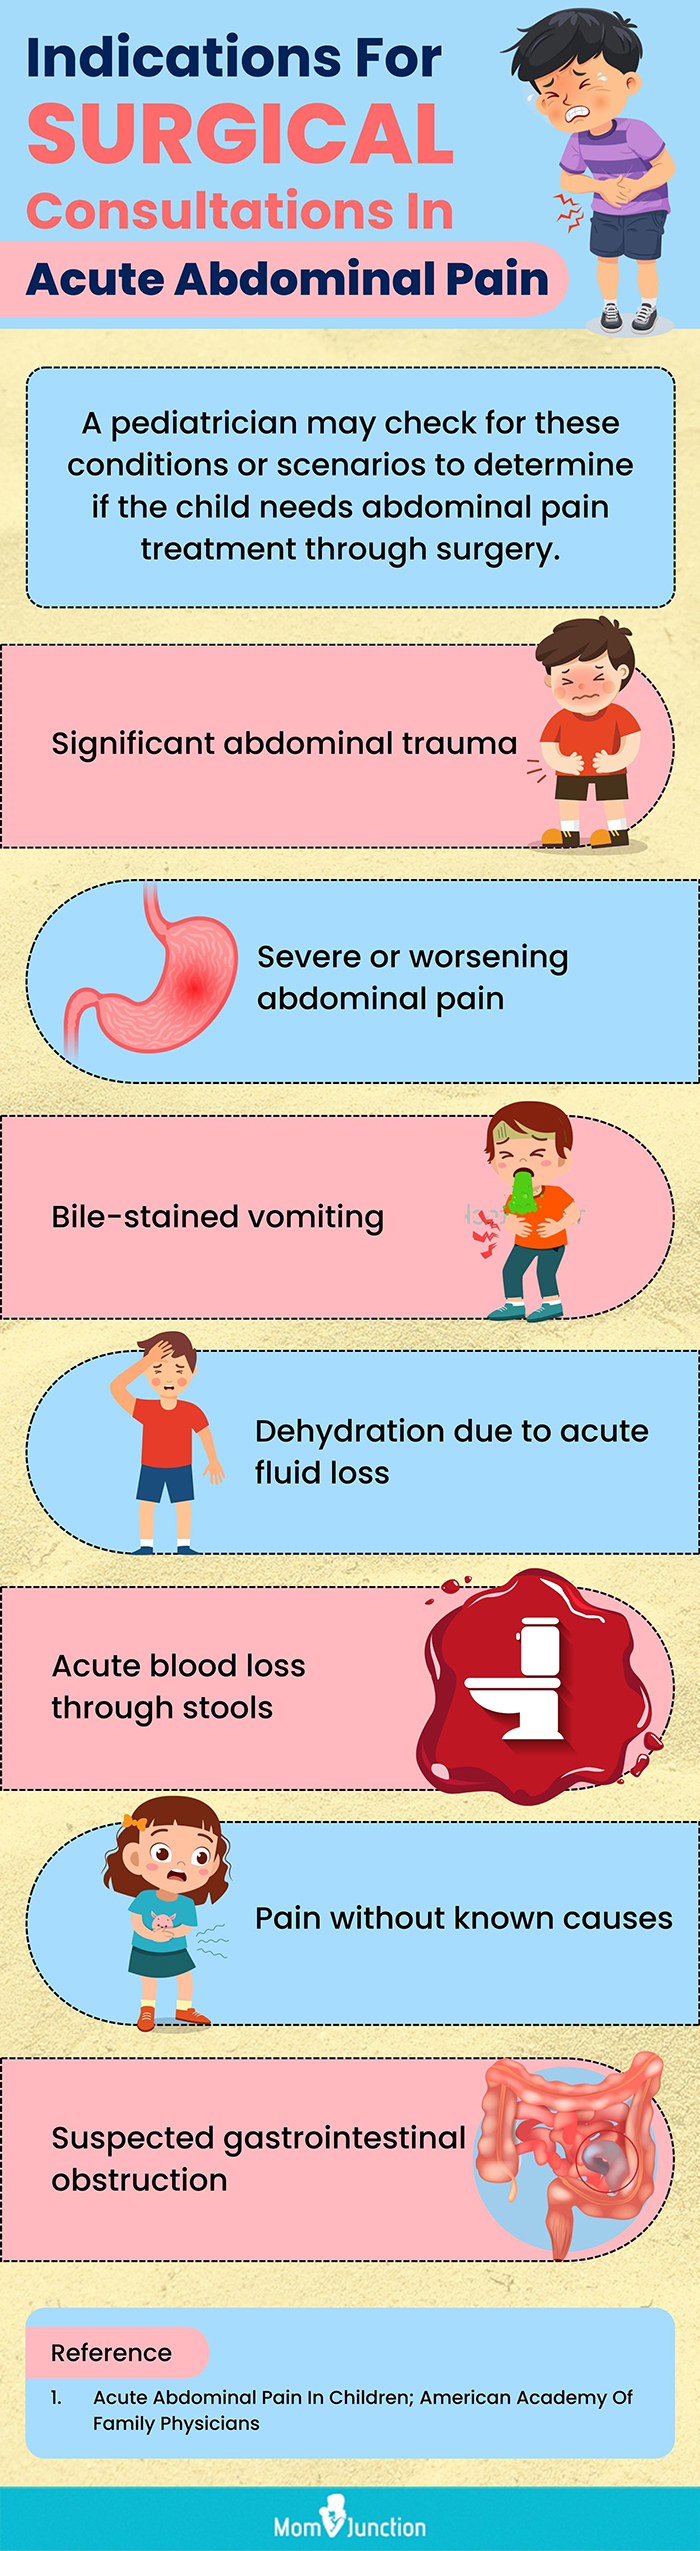 indications for surgical consultations in acute abdominal pain (infographic)